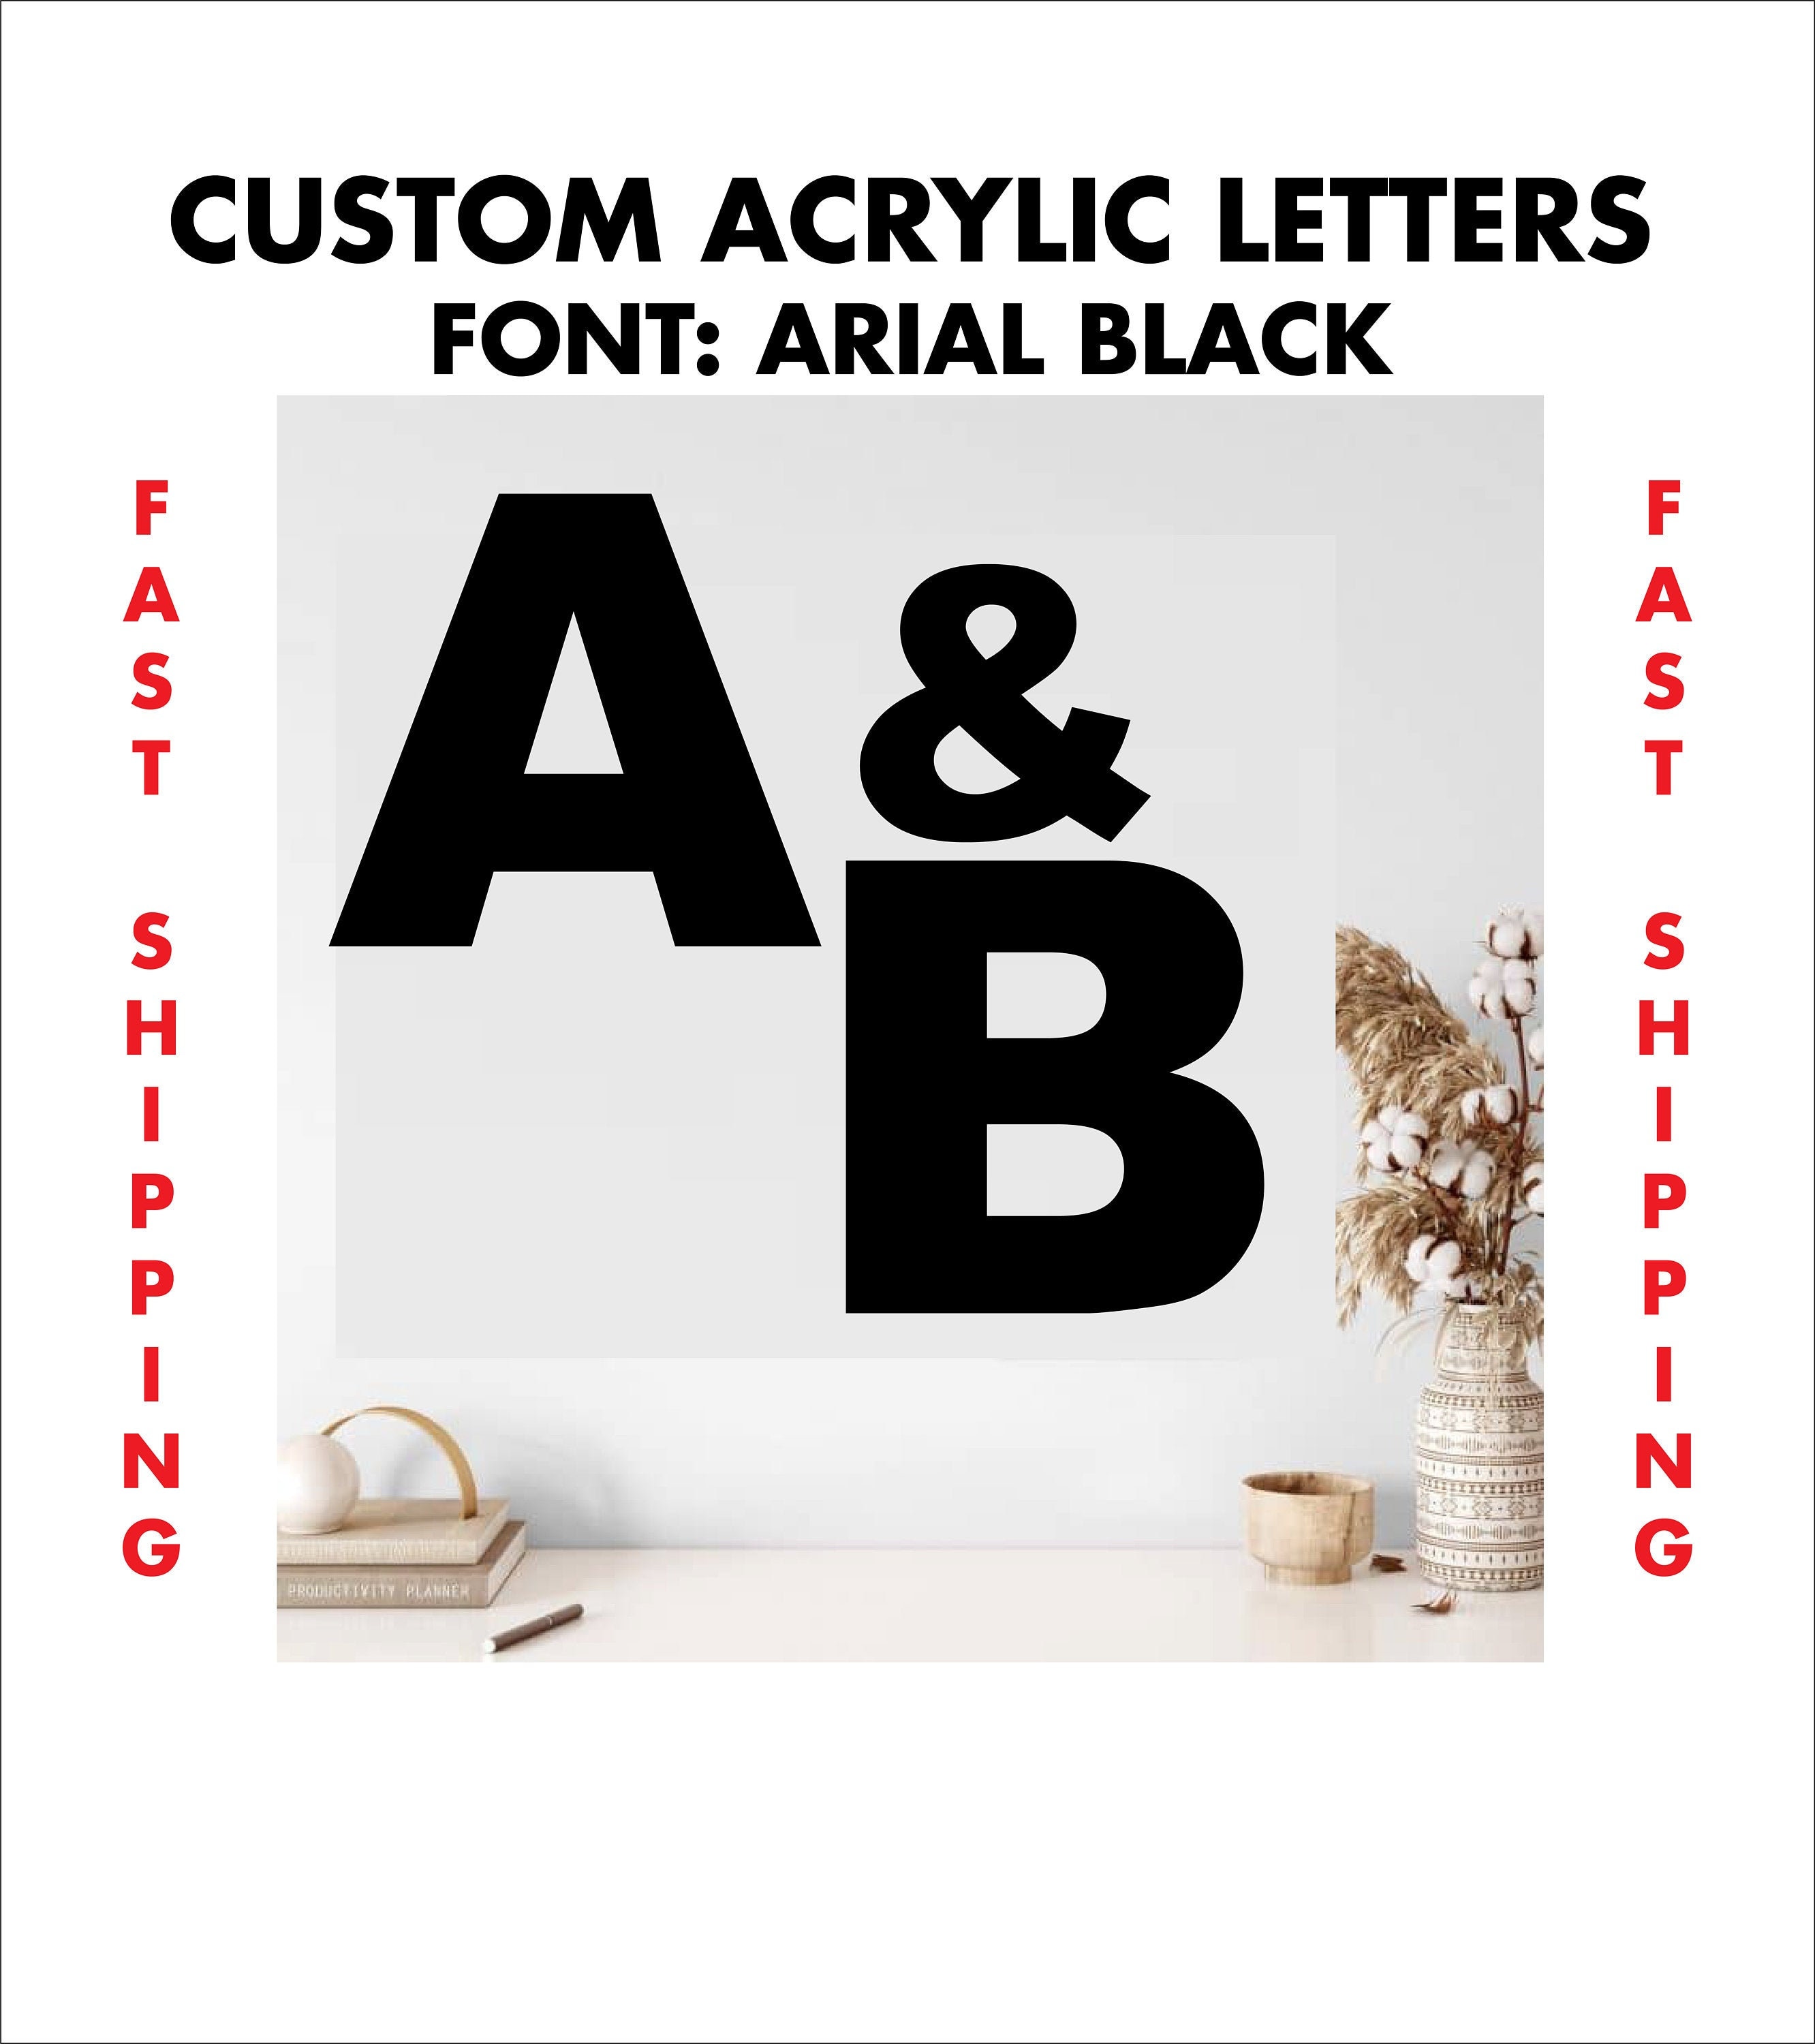 Poster And Bulletin Board Vinyl Letters And Numbers, Black, 1 And 2 H,  250/pack